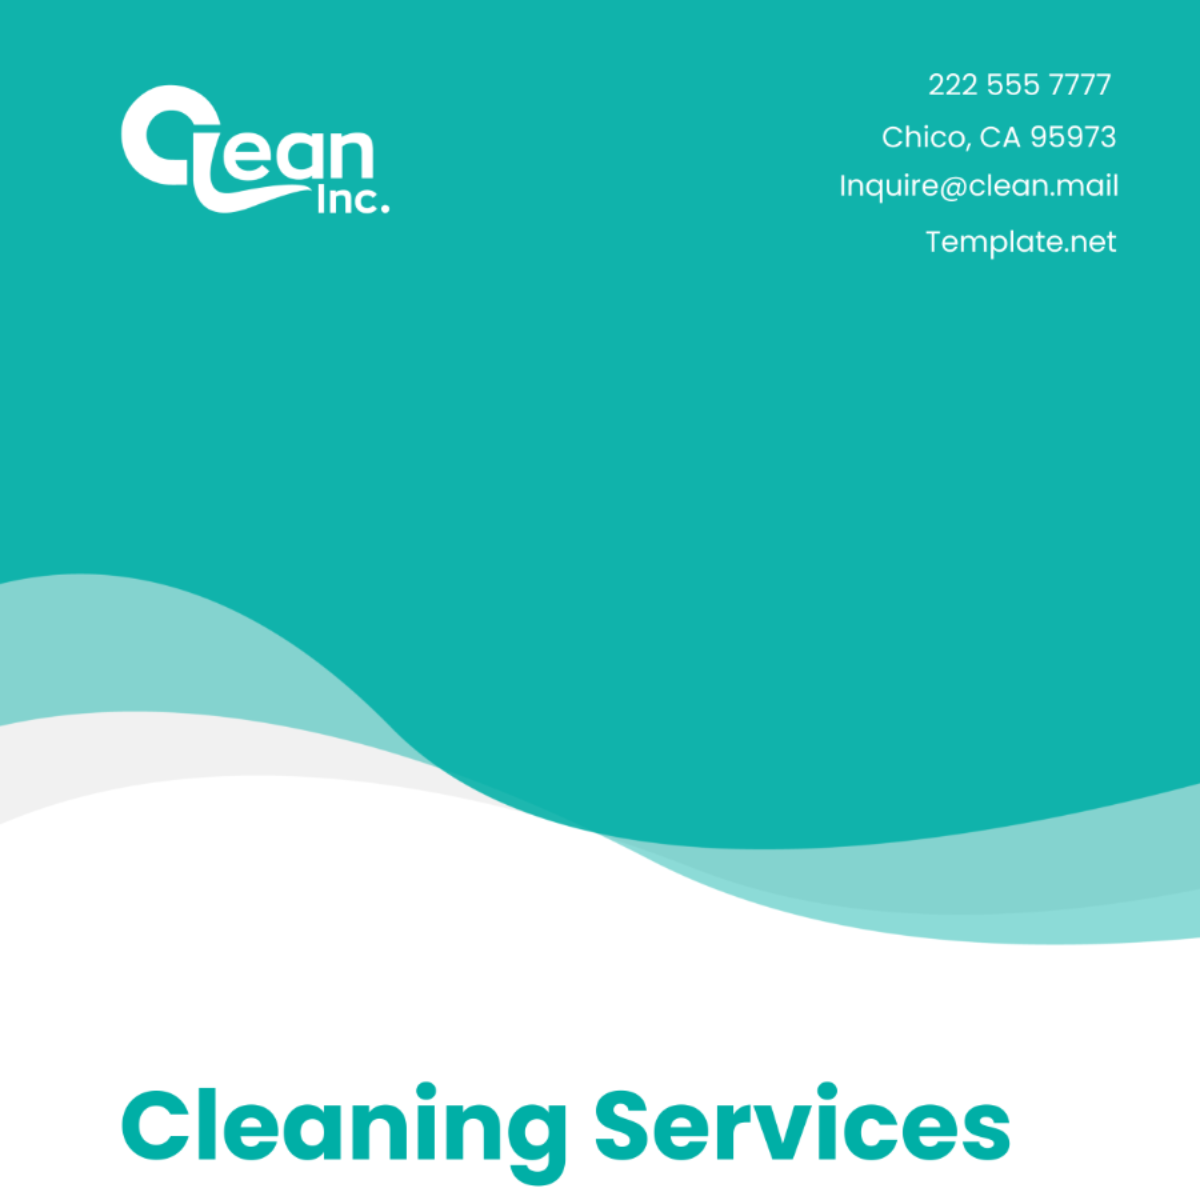 Cleaning Services Leadership Team Building Activity Plan Template